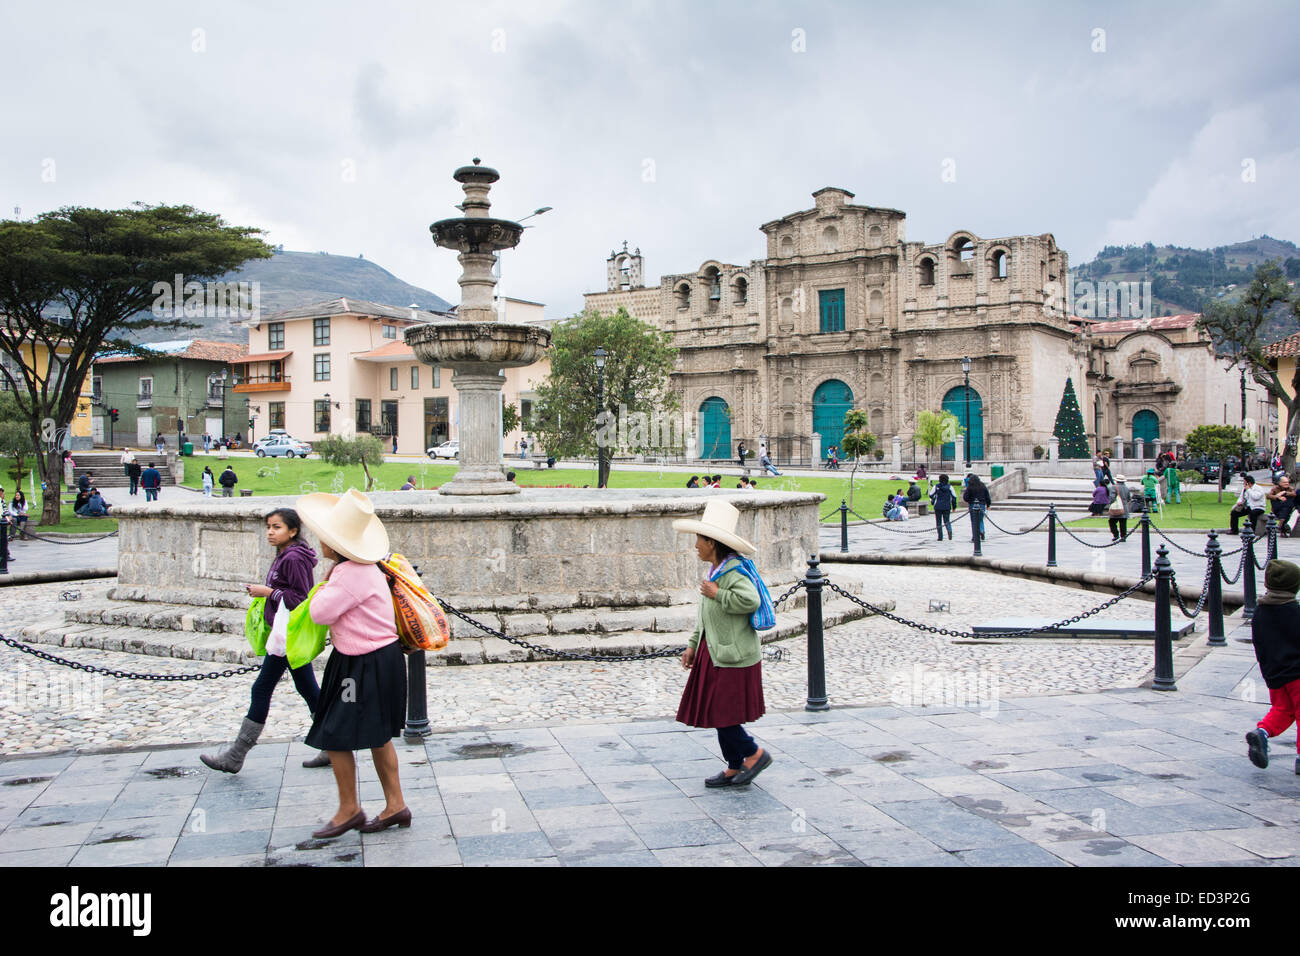 Main square of Cajamarca city in norther peru with locals in traditional dress and hats walking through Stock Photo